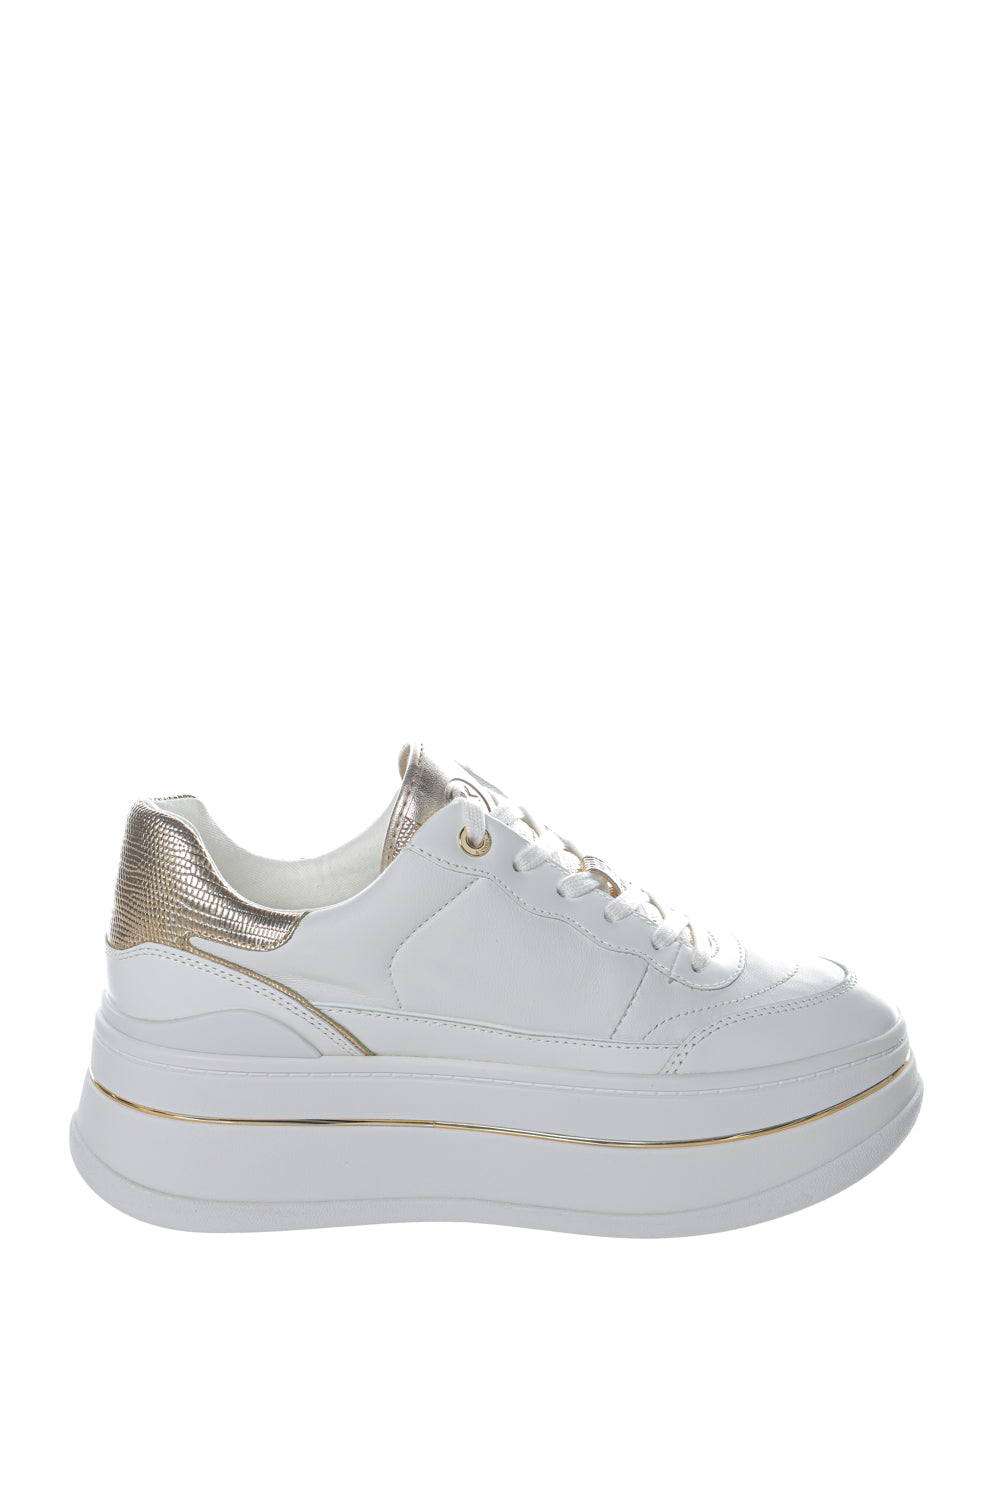 Sneakers Michael Kors Hayes Lace Up